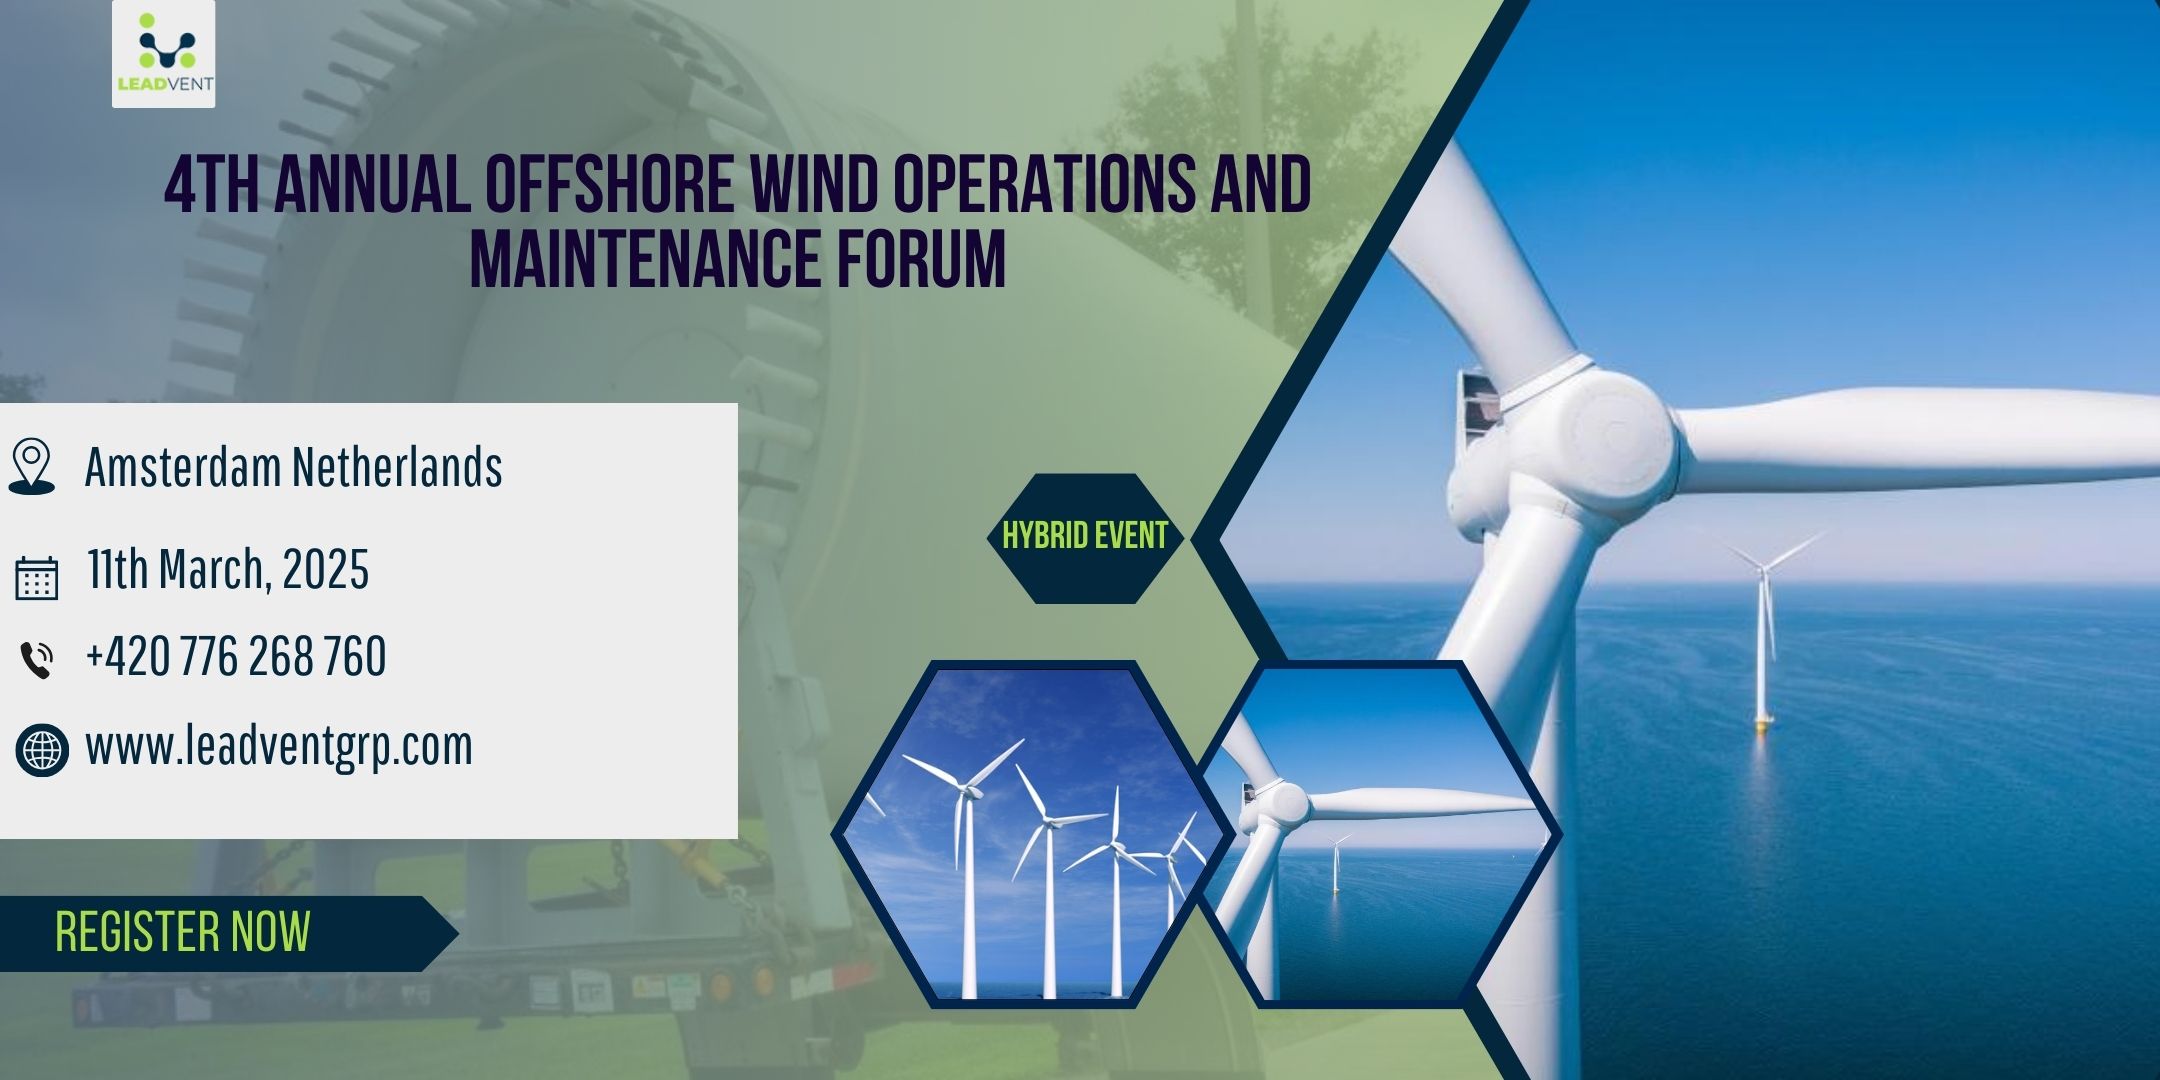 4th Annual Offshore Wind Operations and Maintenance Forum organized by Leadvent Group